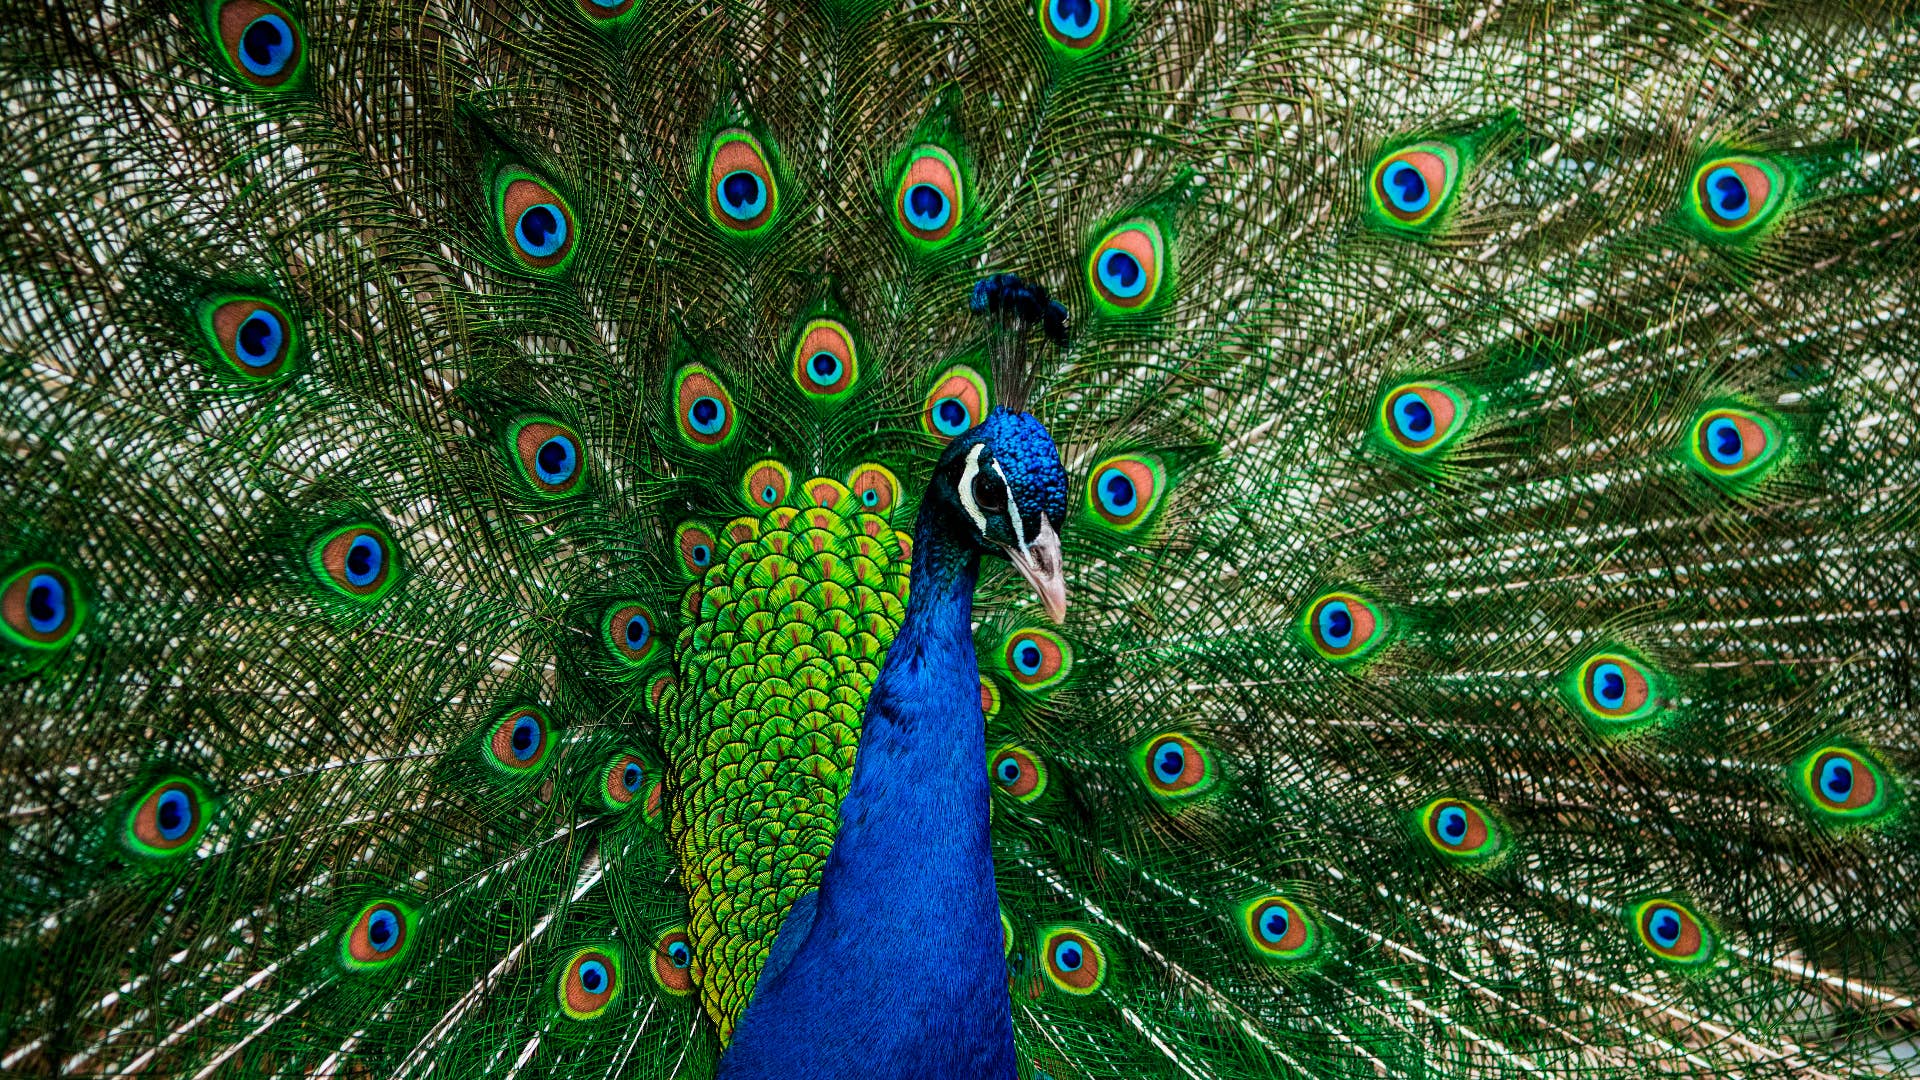 A peacock is pictured at the outdoor museum Skansen in Stockholm, on April 18, 2020.